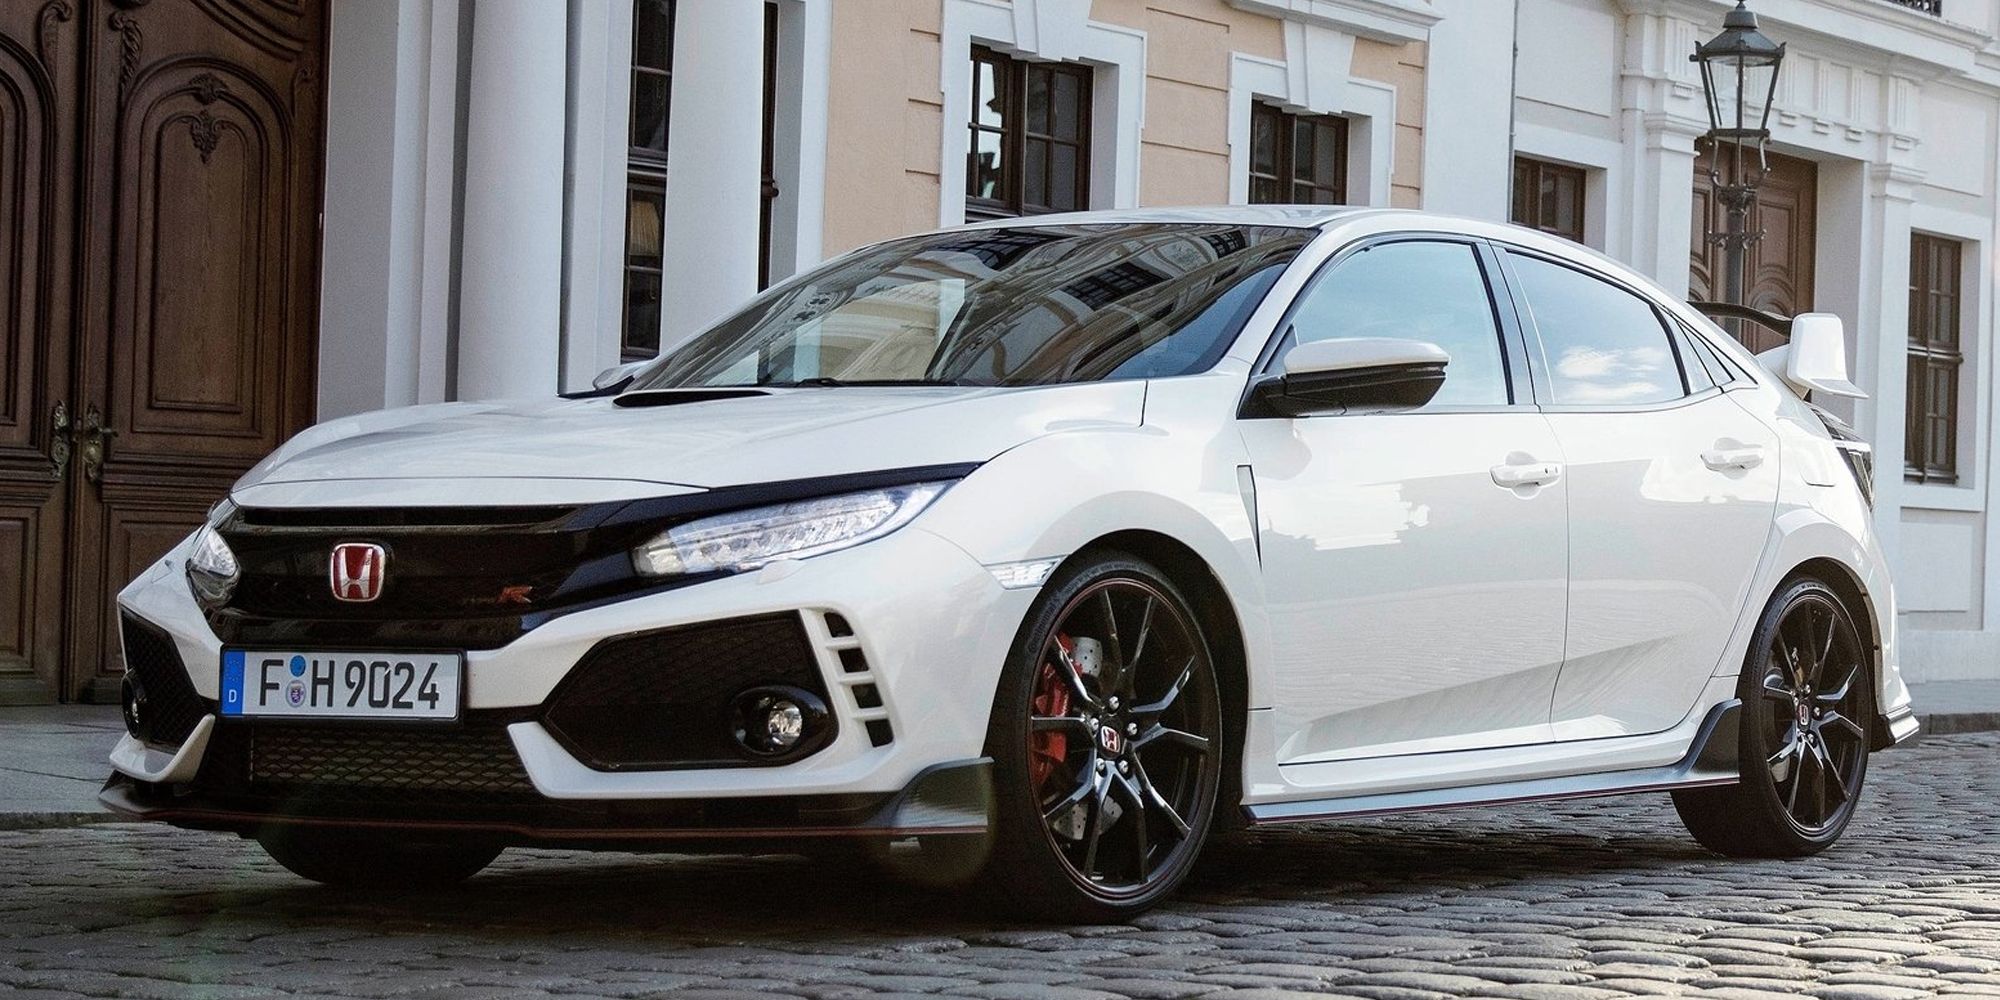 Front 3/4 view of the Civic Type R